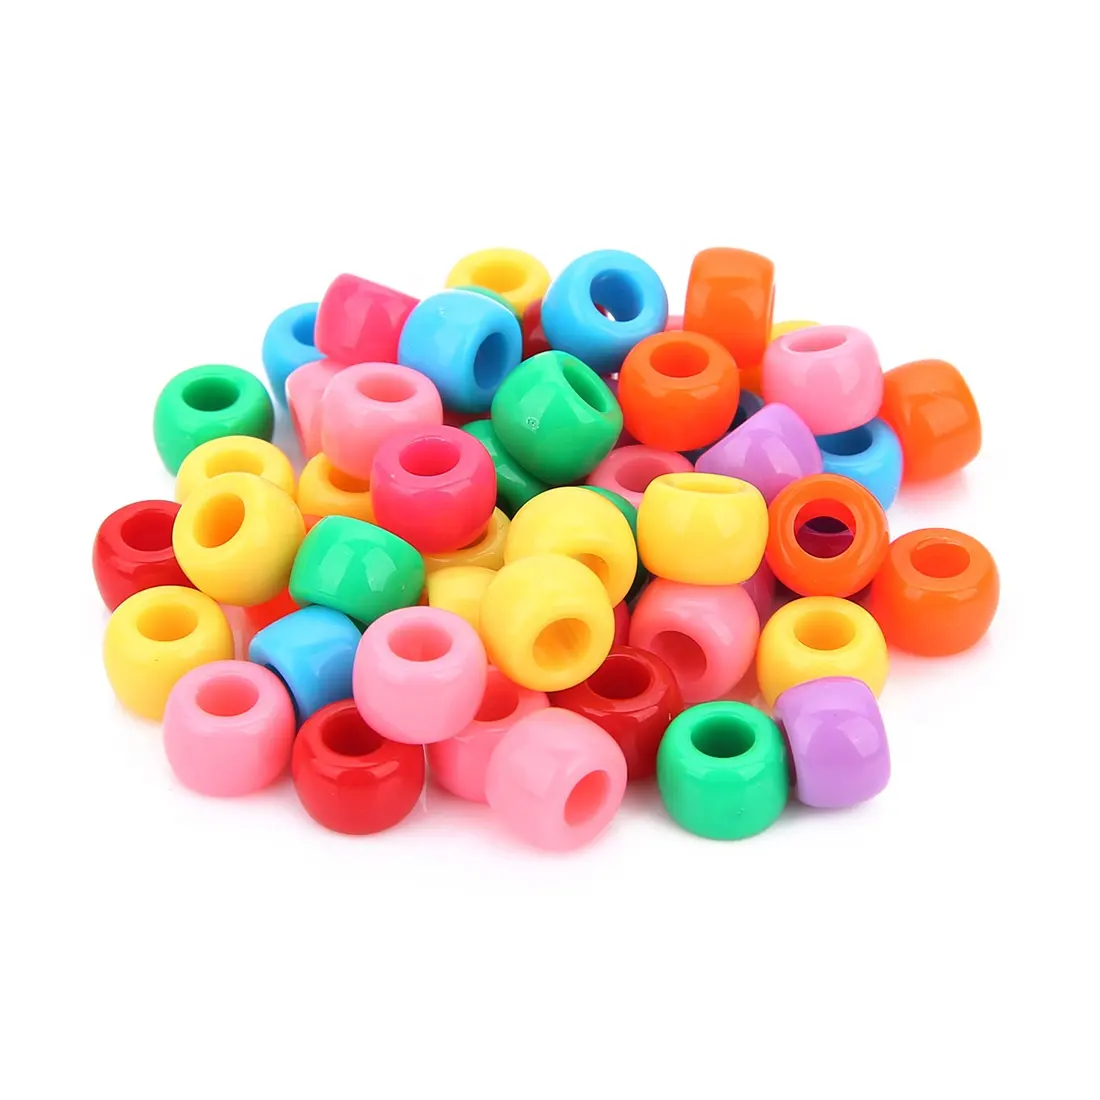 New Product 50g Mix Color Acrylic Plastic Pony Beads For Diy Craft Bracelets Necklace Jewelry Making Kit